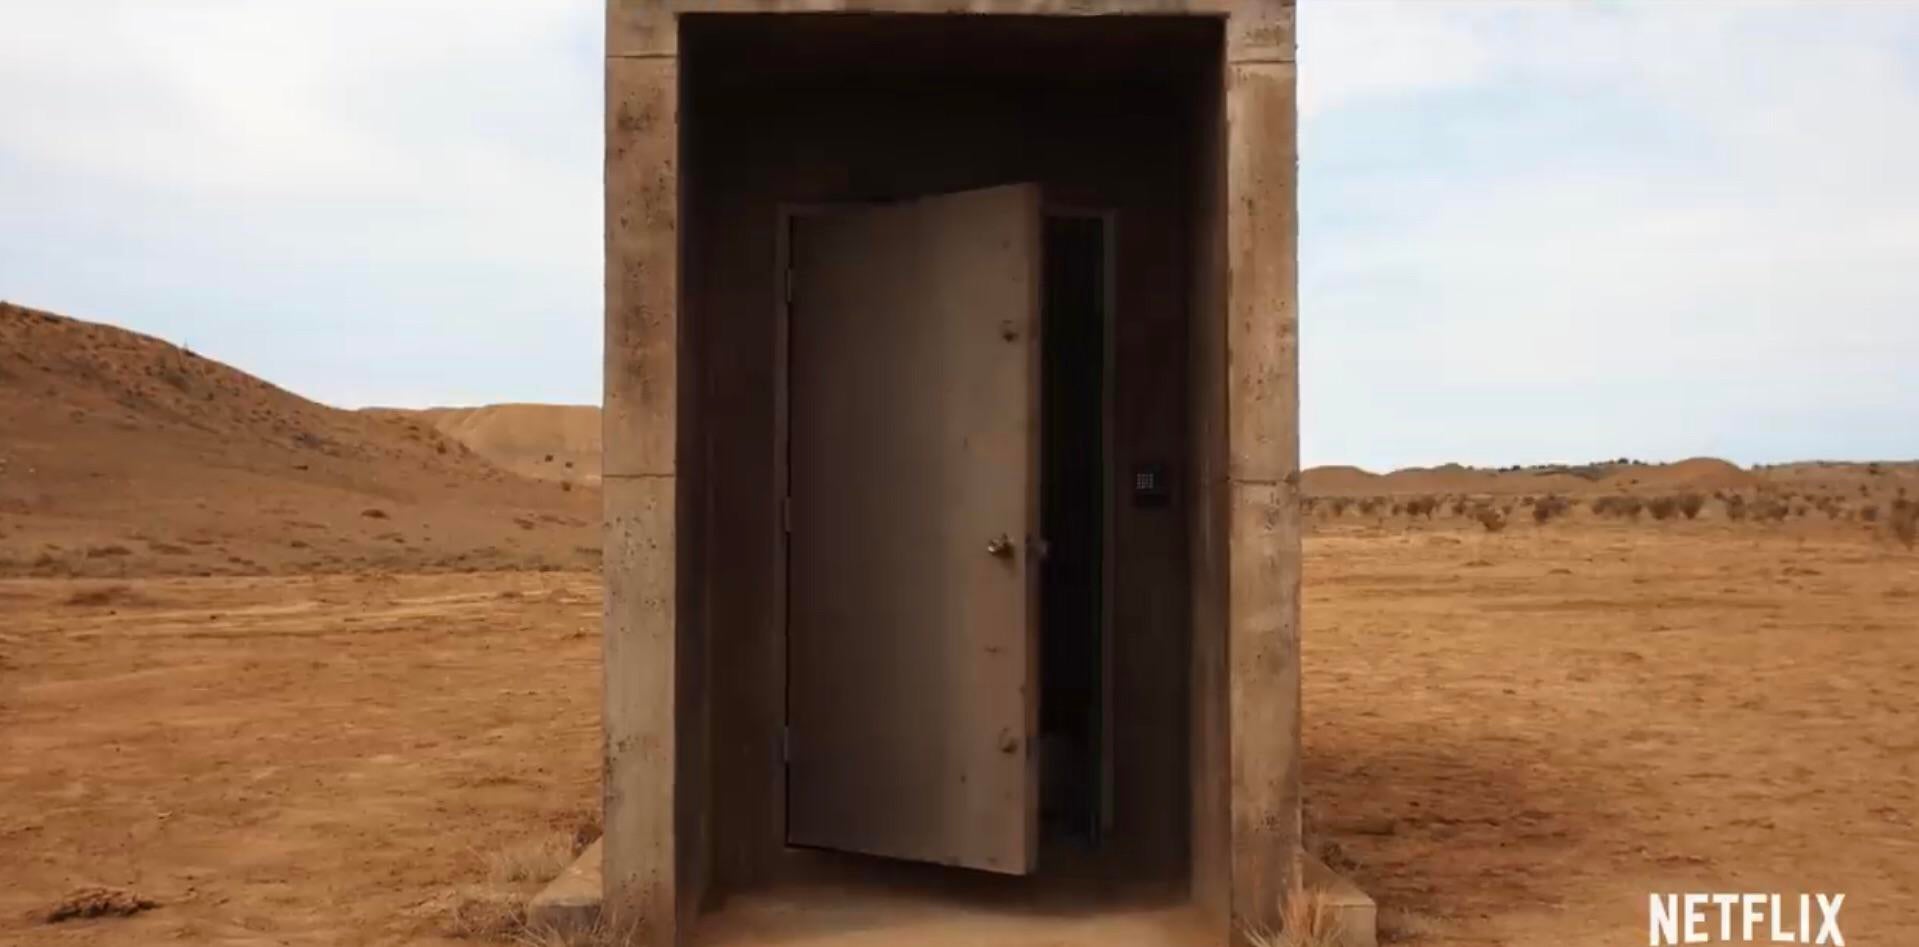 'Stranger Things' Season 4 image of a mystery door in the middle of a desert